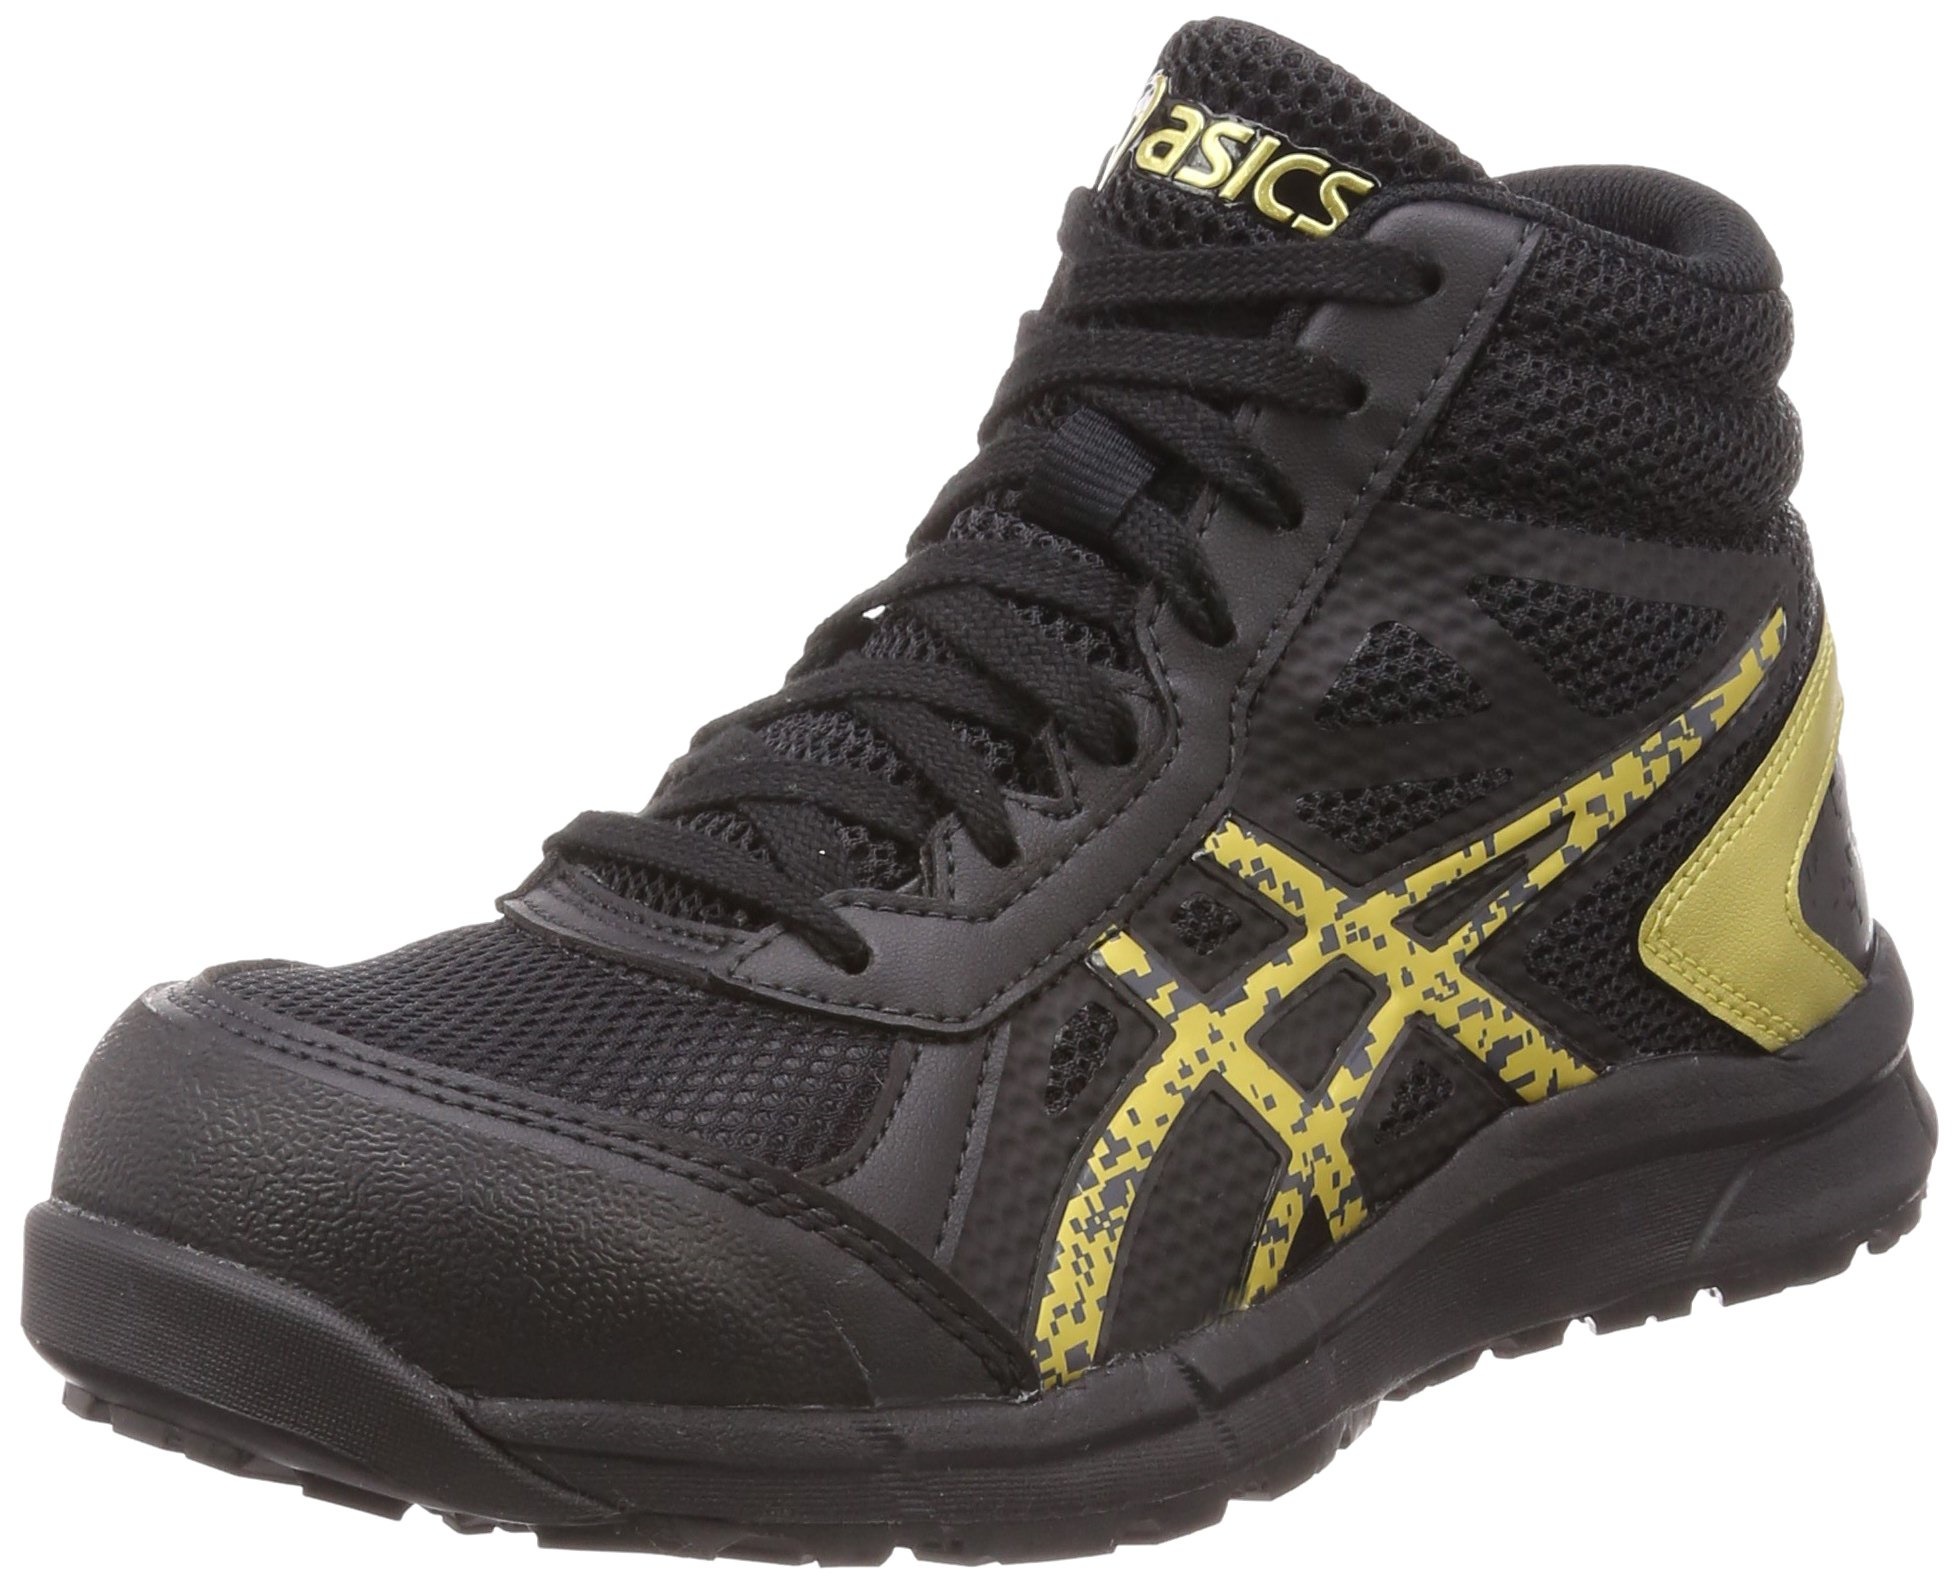 asics safety boots singapore off 52 